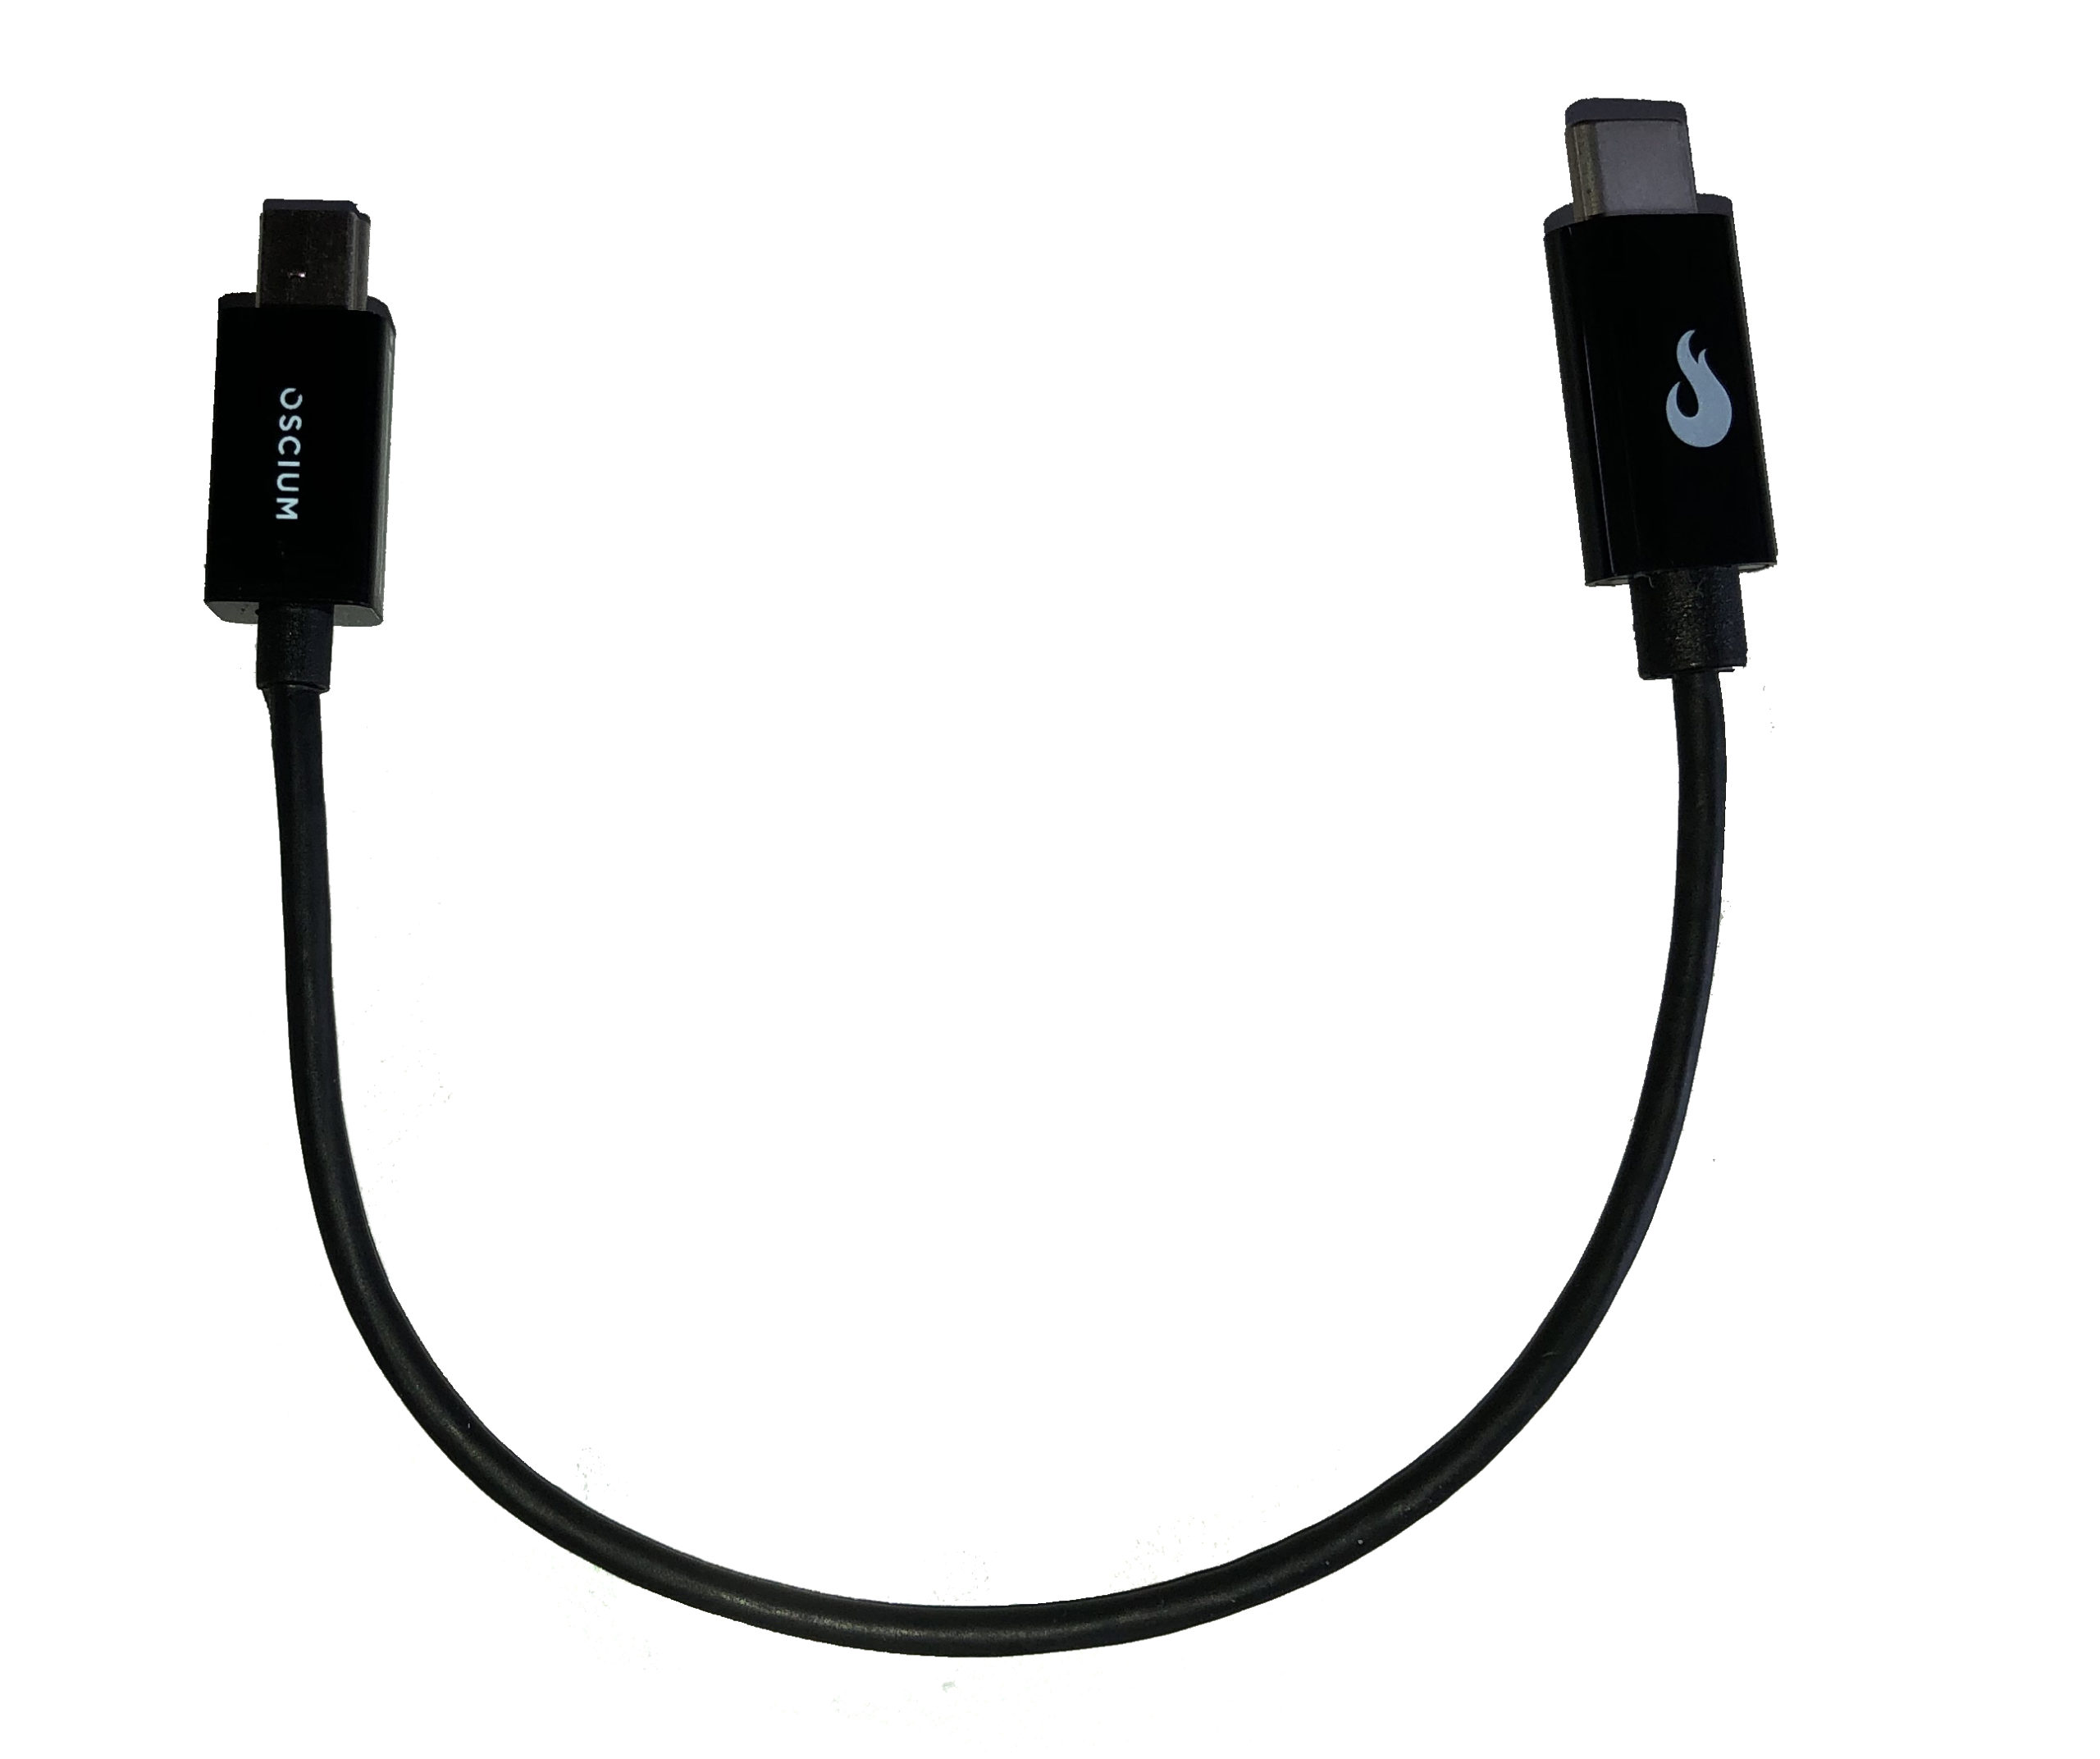 Oscium mini-B to USB-C cable top down view.